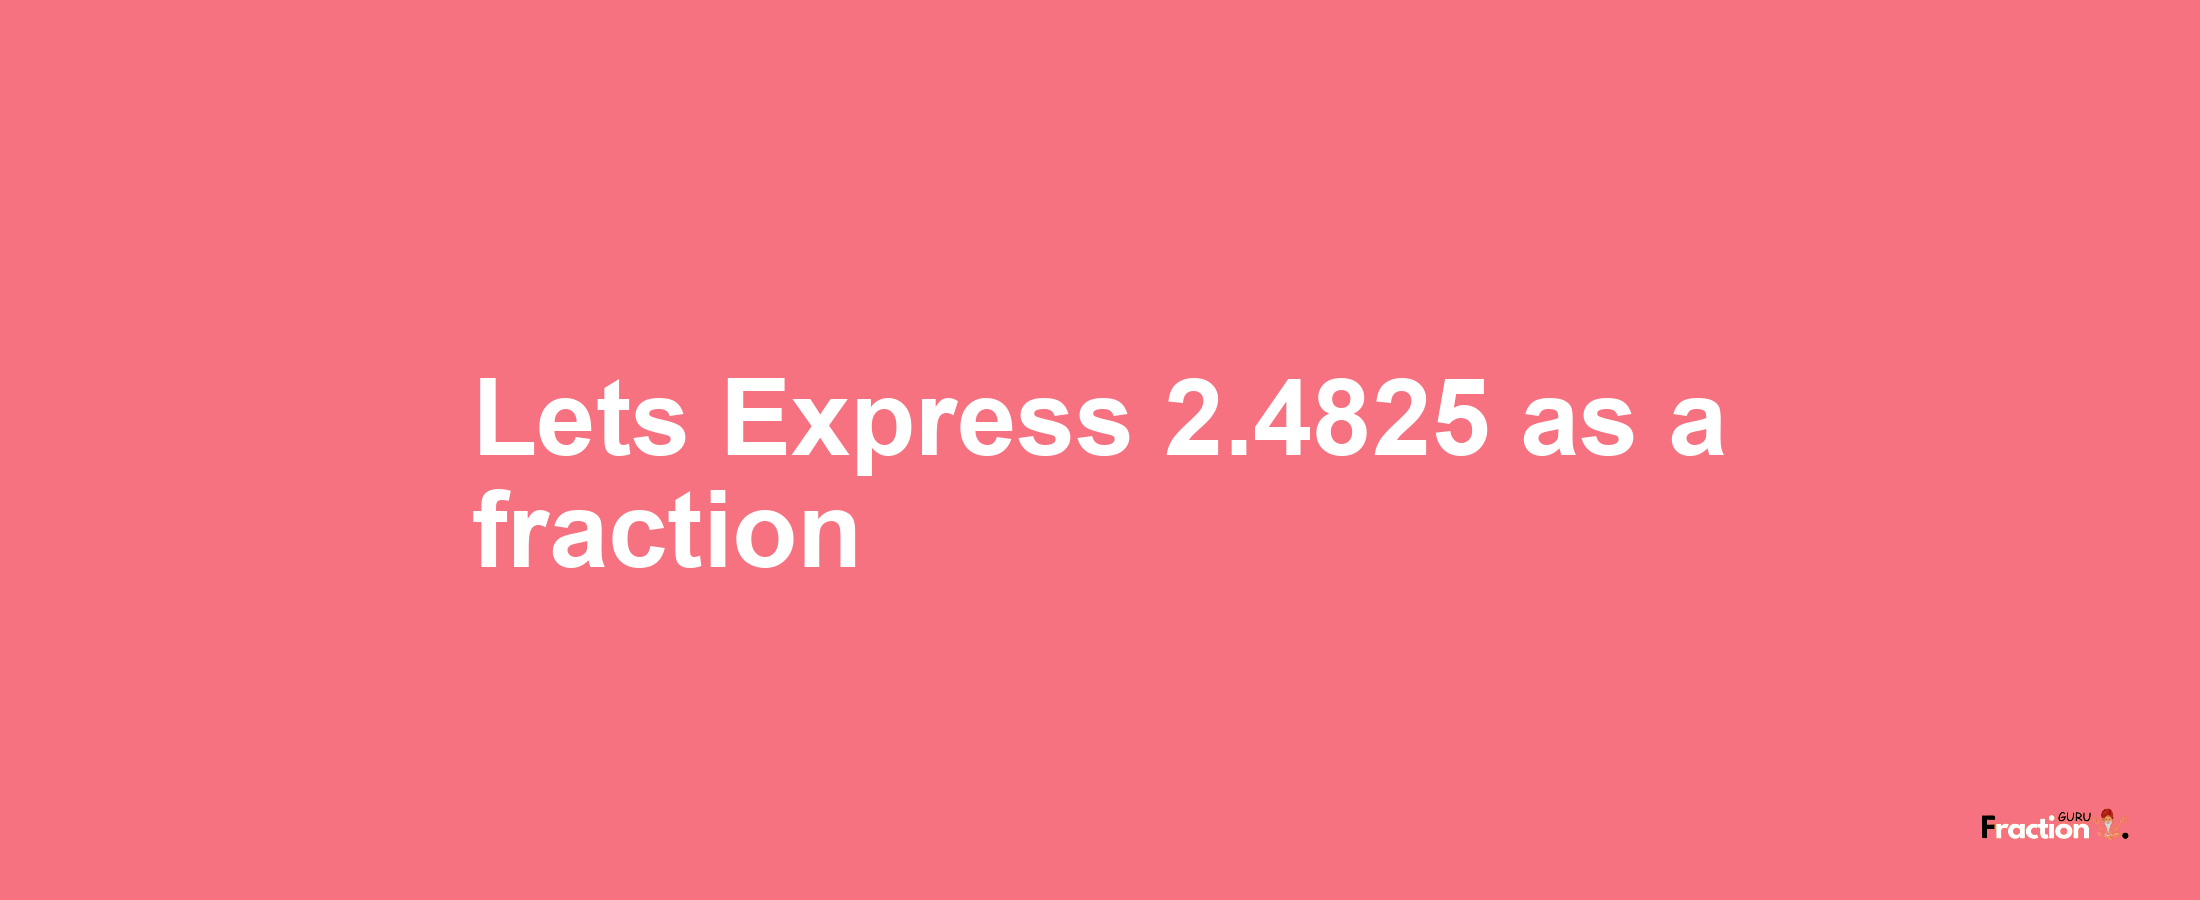 Lets Express 2.4825 as afraction